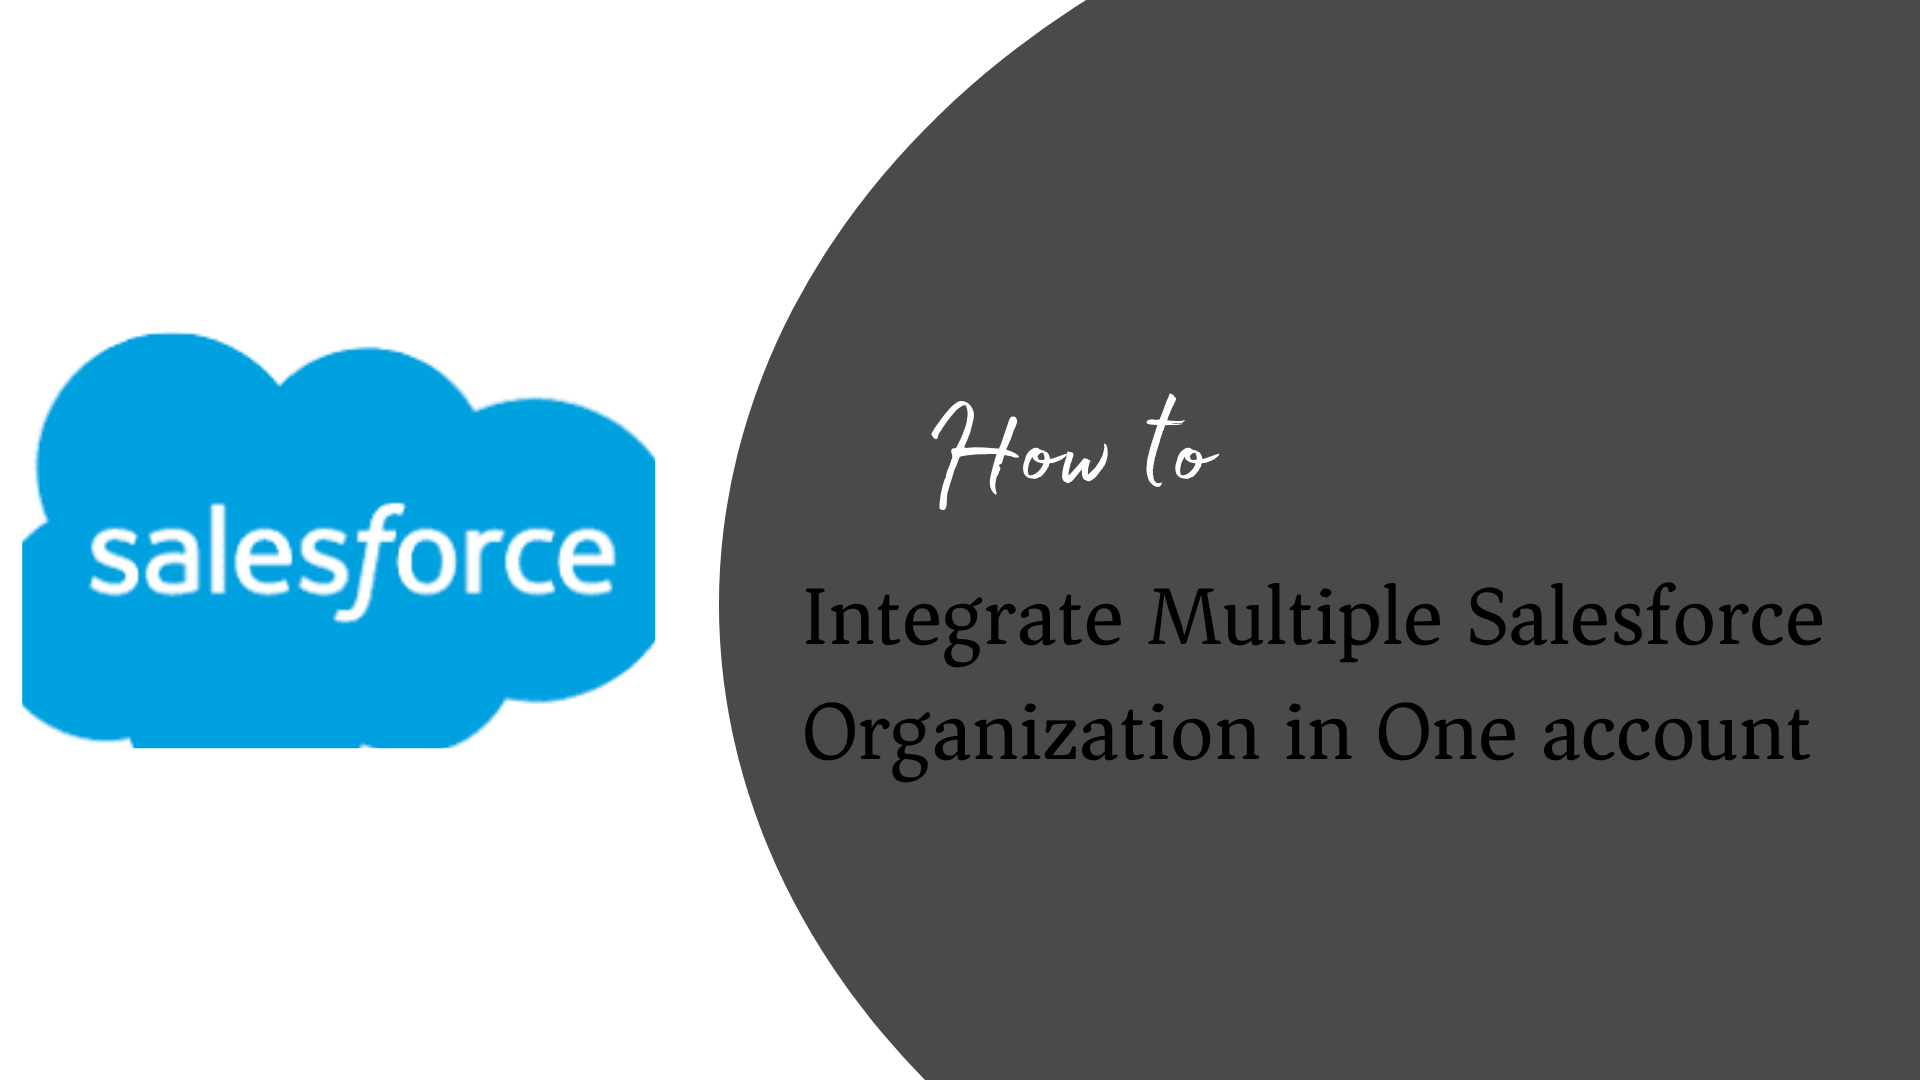 How to Integrate Multiple Salesforce Organization in One account